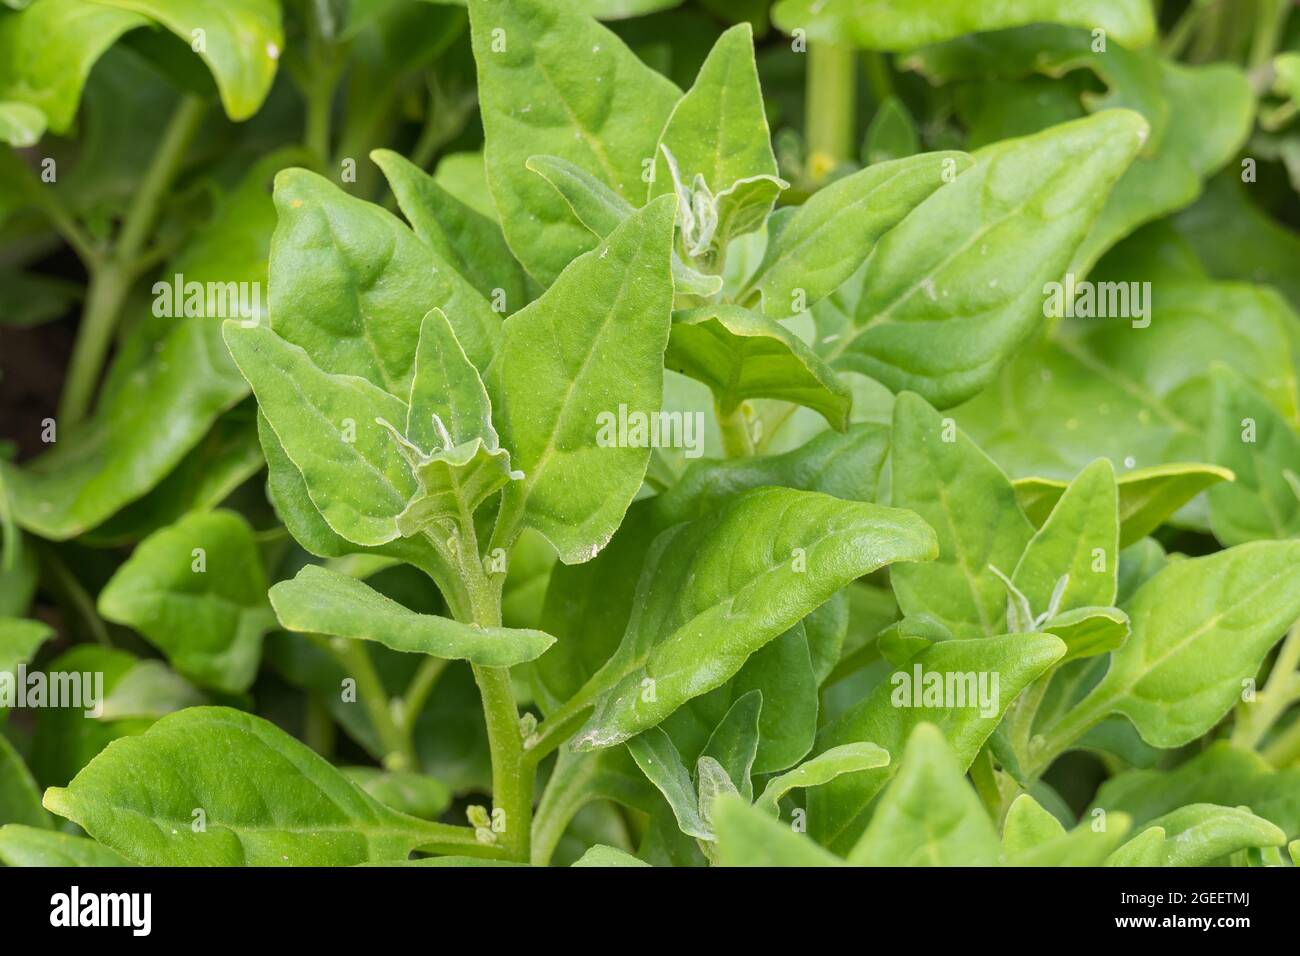 plant Tetragonia tetragonioides or New Zealand spinach growing outdoors in spring Stock Photo